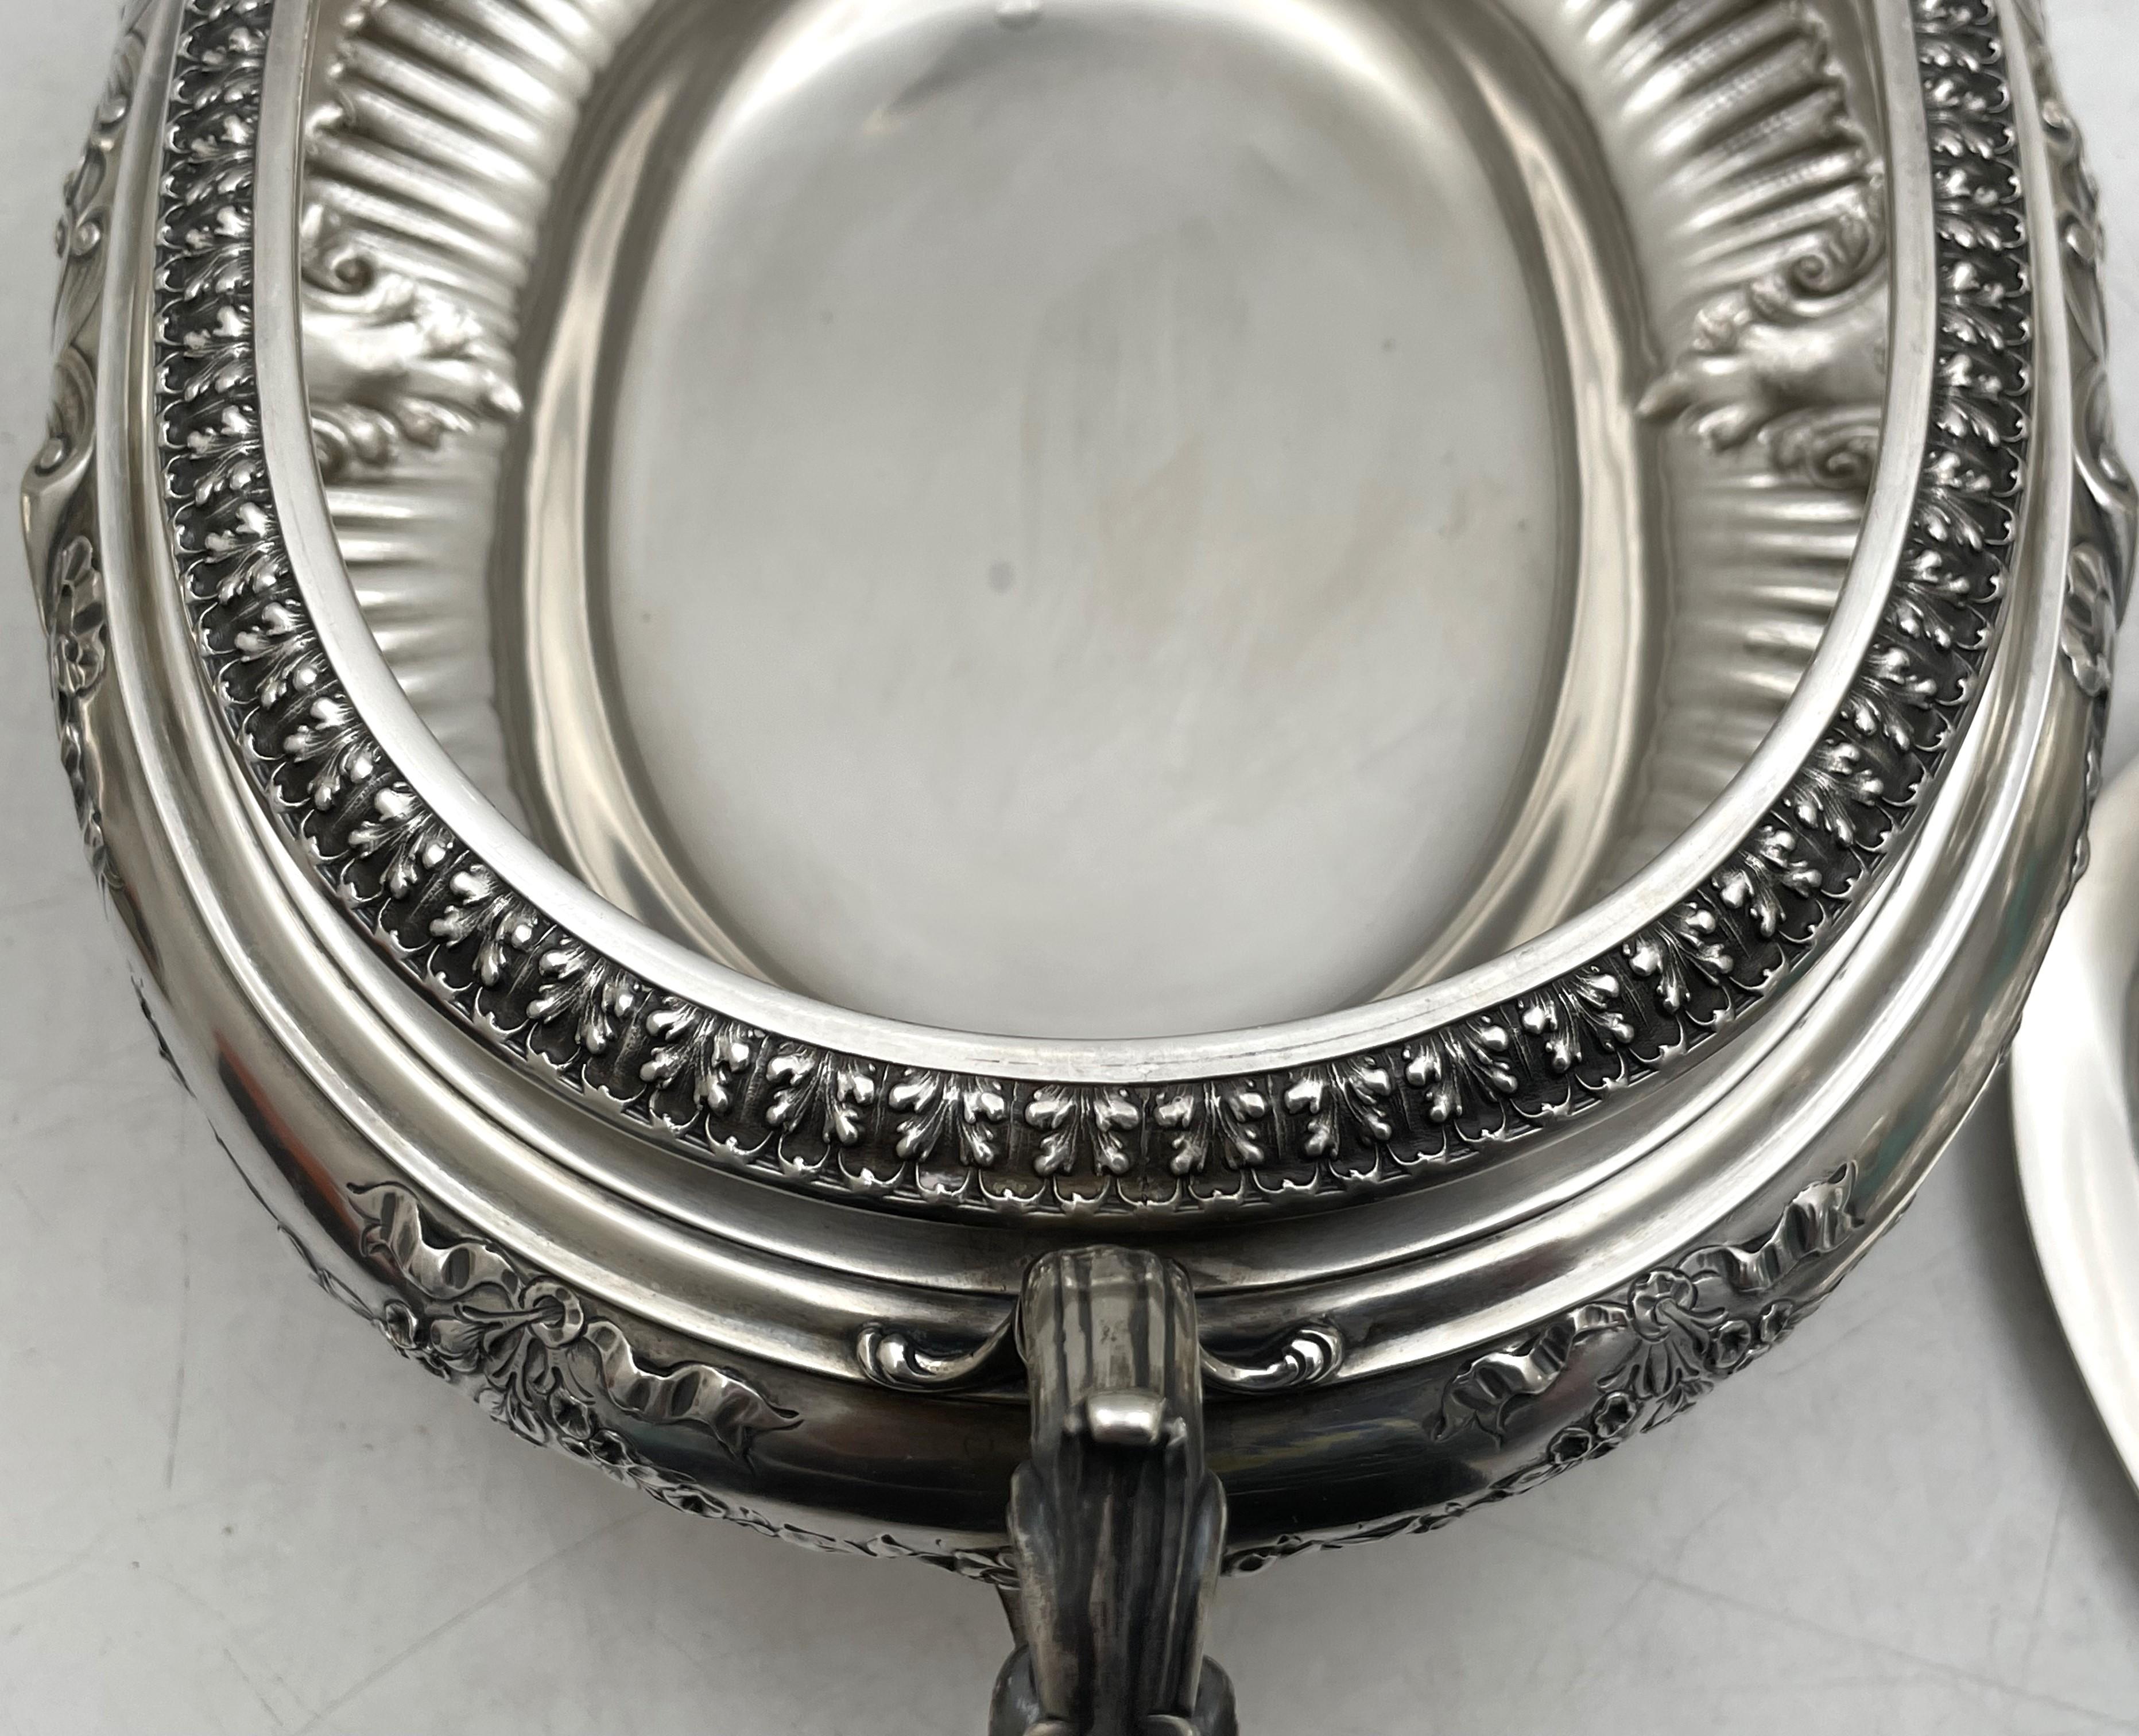 Gorham Sterling Silver 1898 Two-Handled Tureen/ Covered Bowl Art Nouveau Style For Sale 3